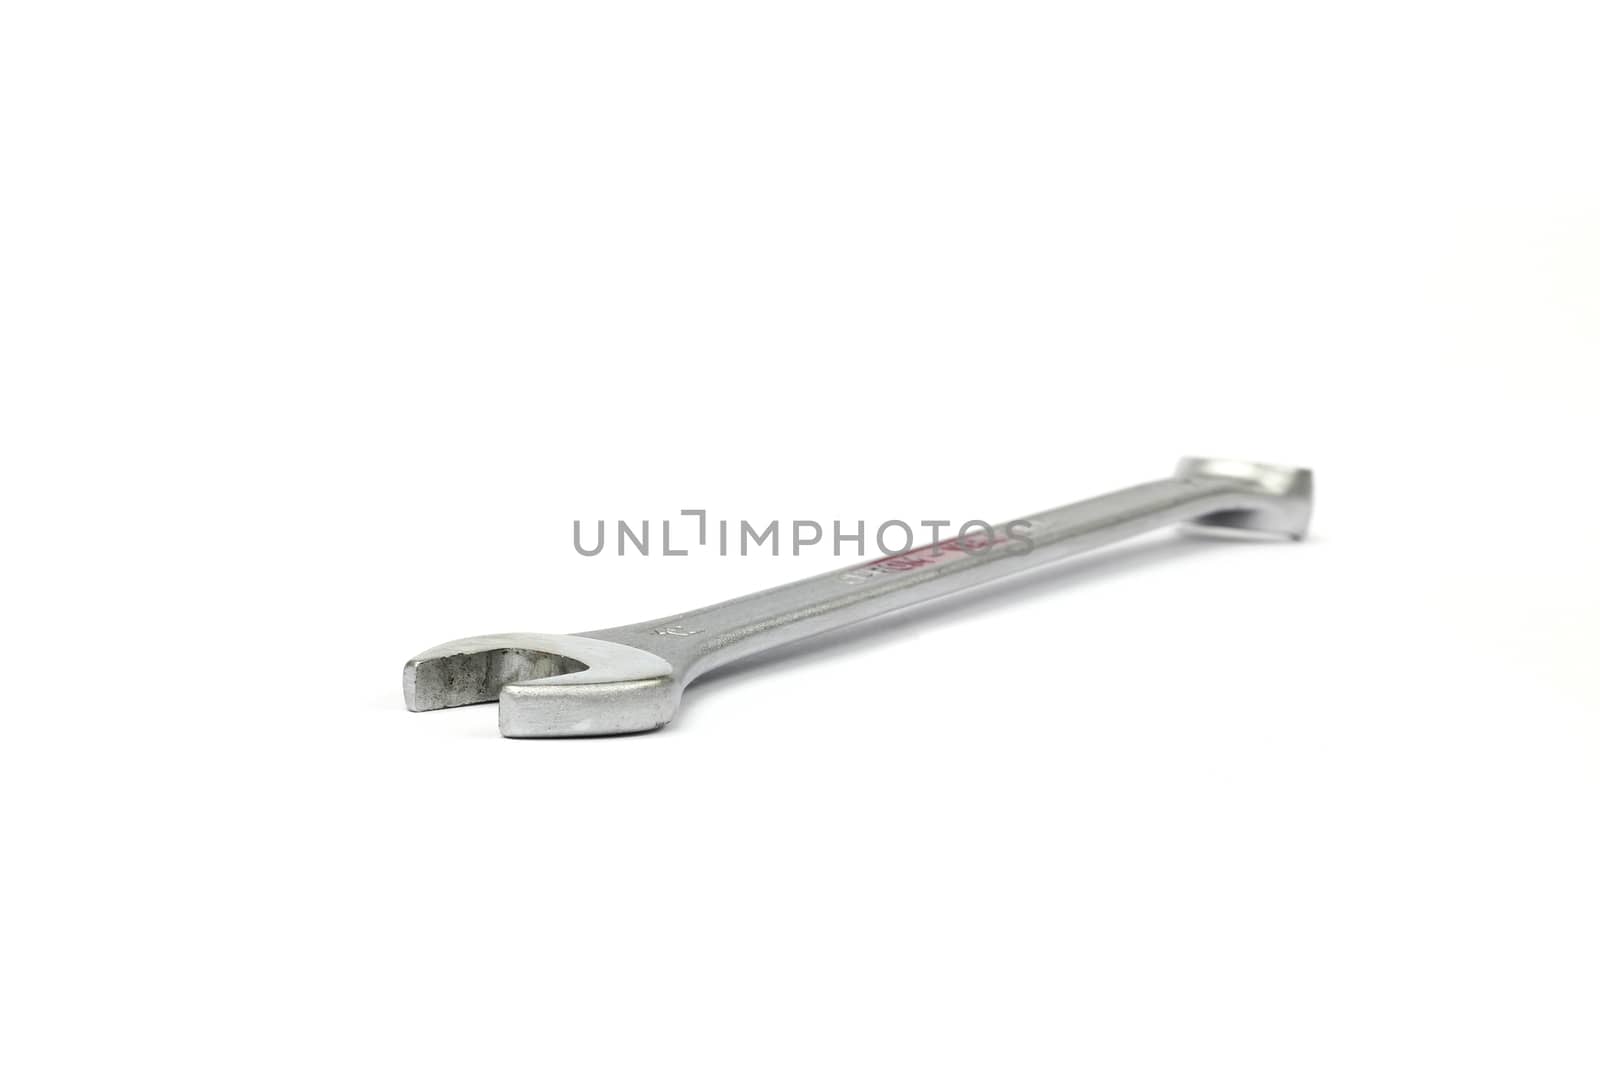 isolated white bac kground  Stainless Steel Wrench close up by ZONETEEn